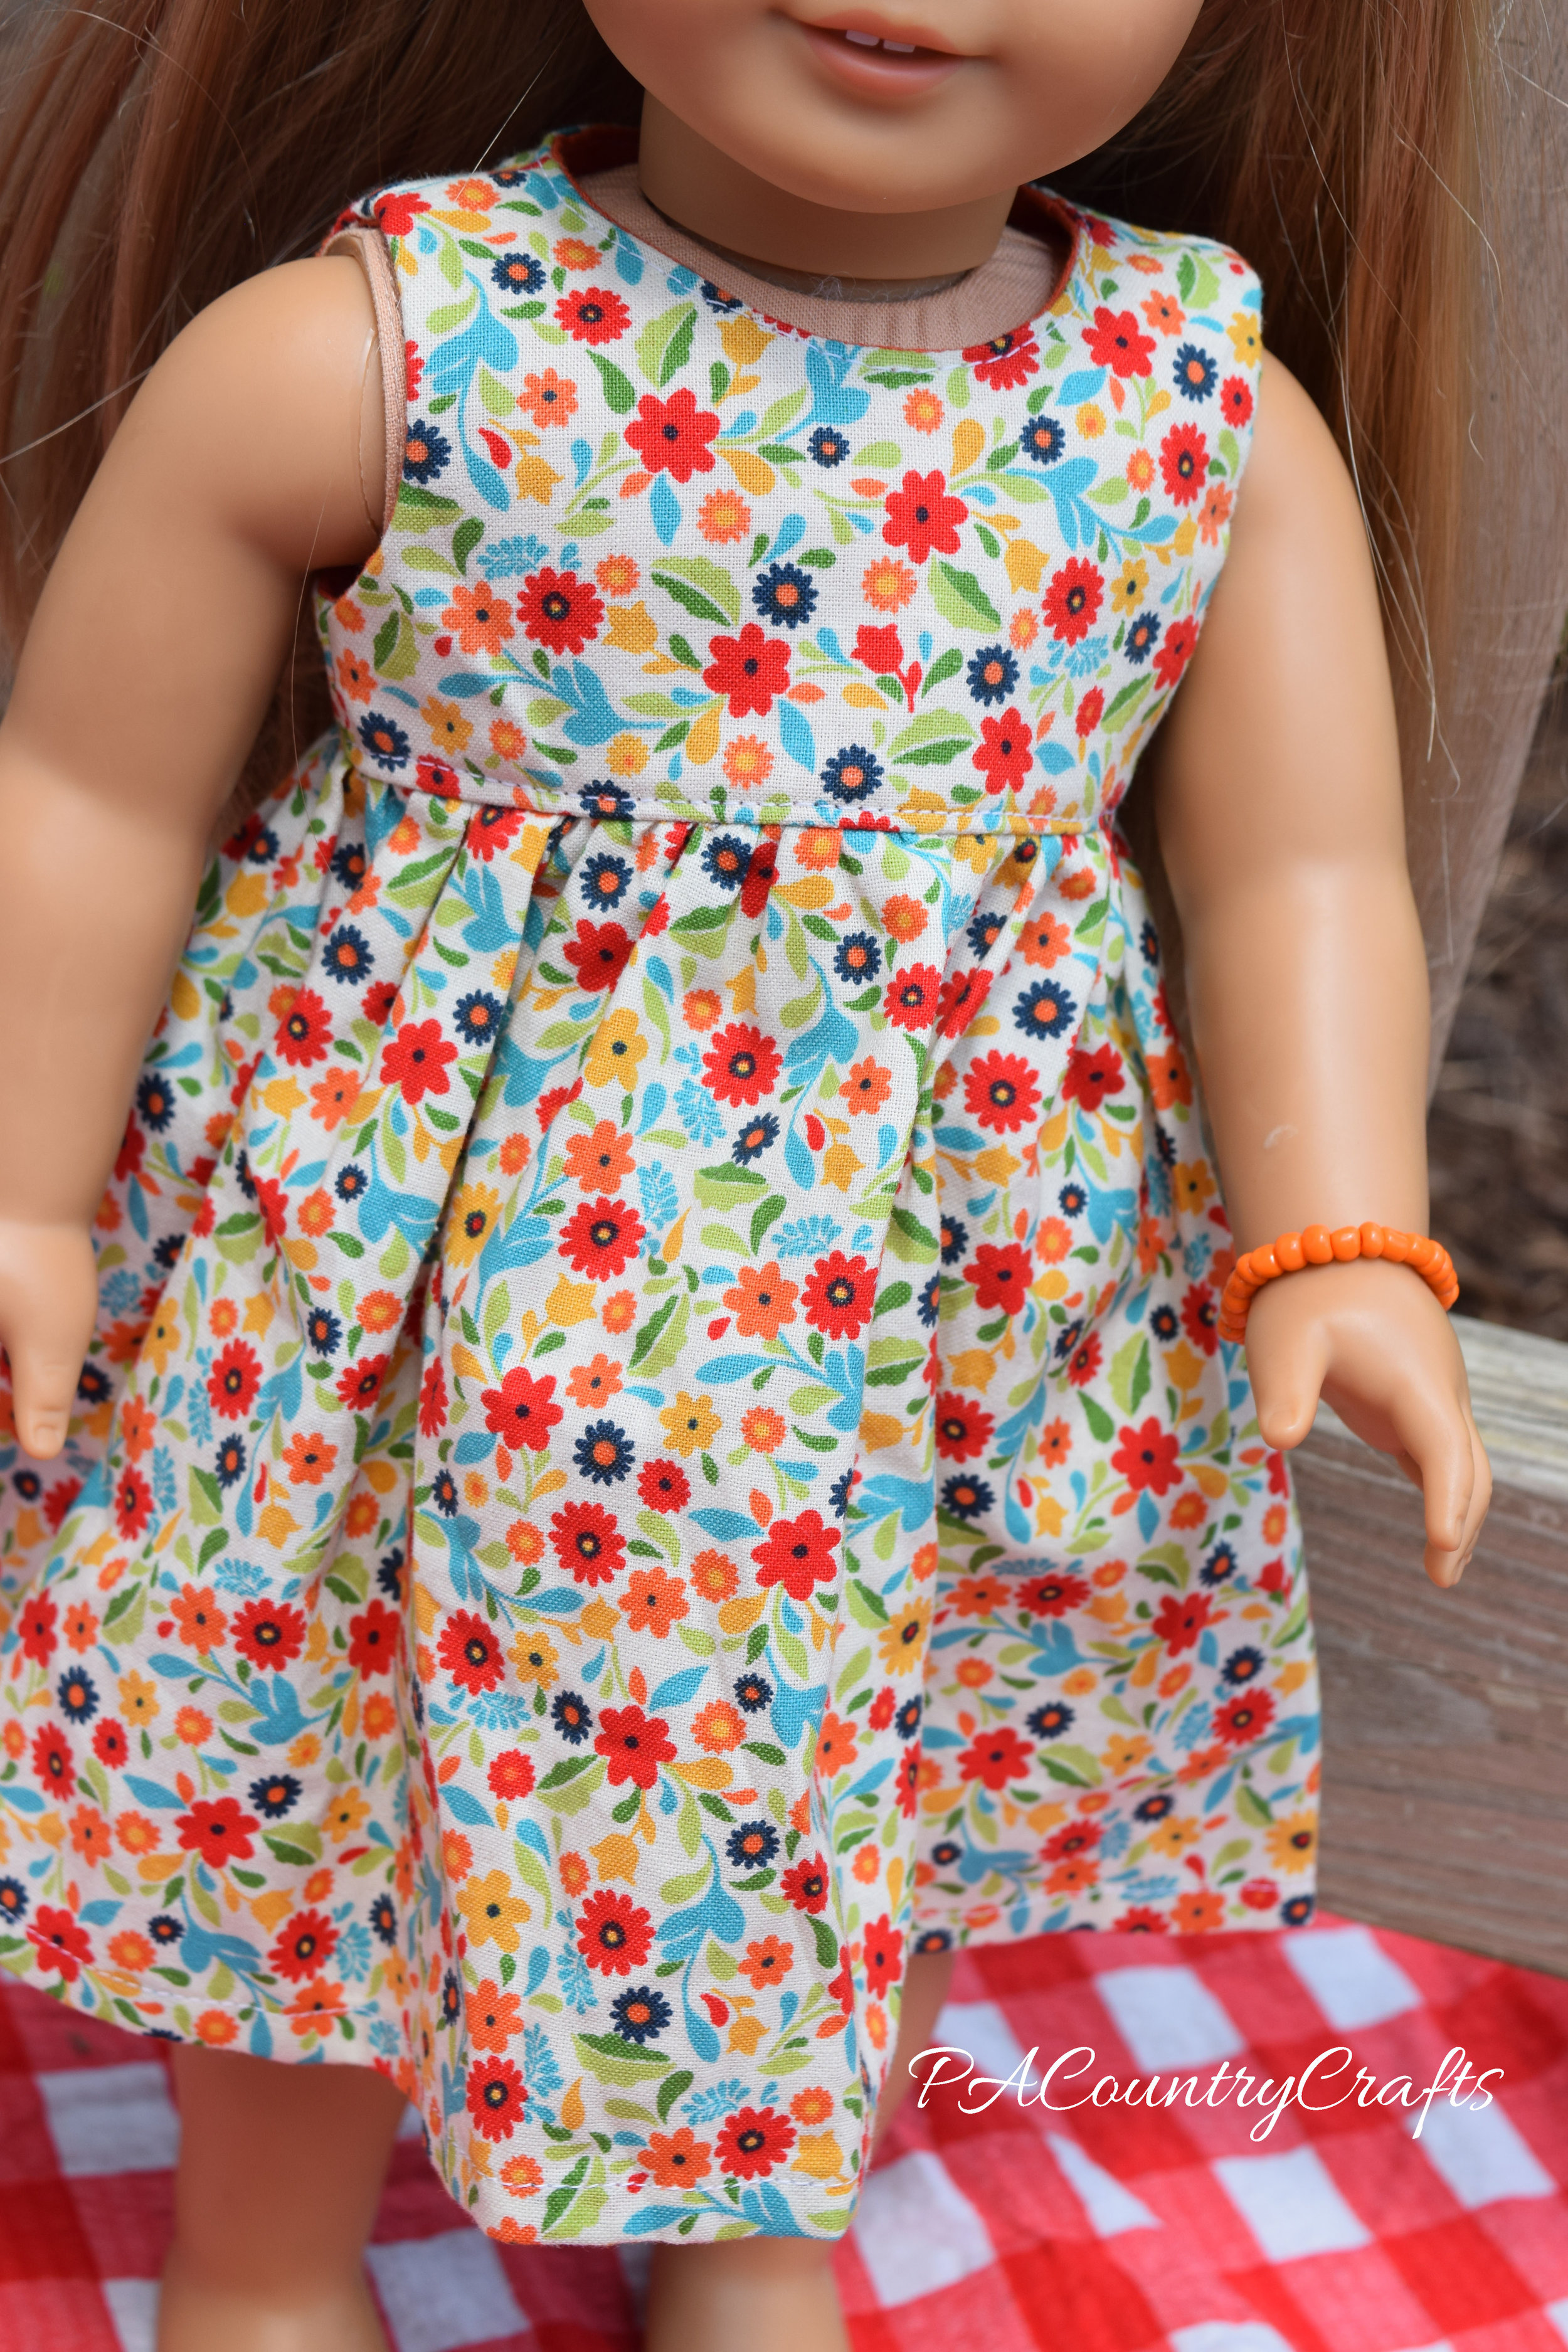 American girl doll simple dress- made by a 12yo